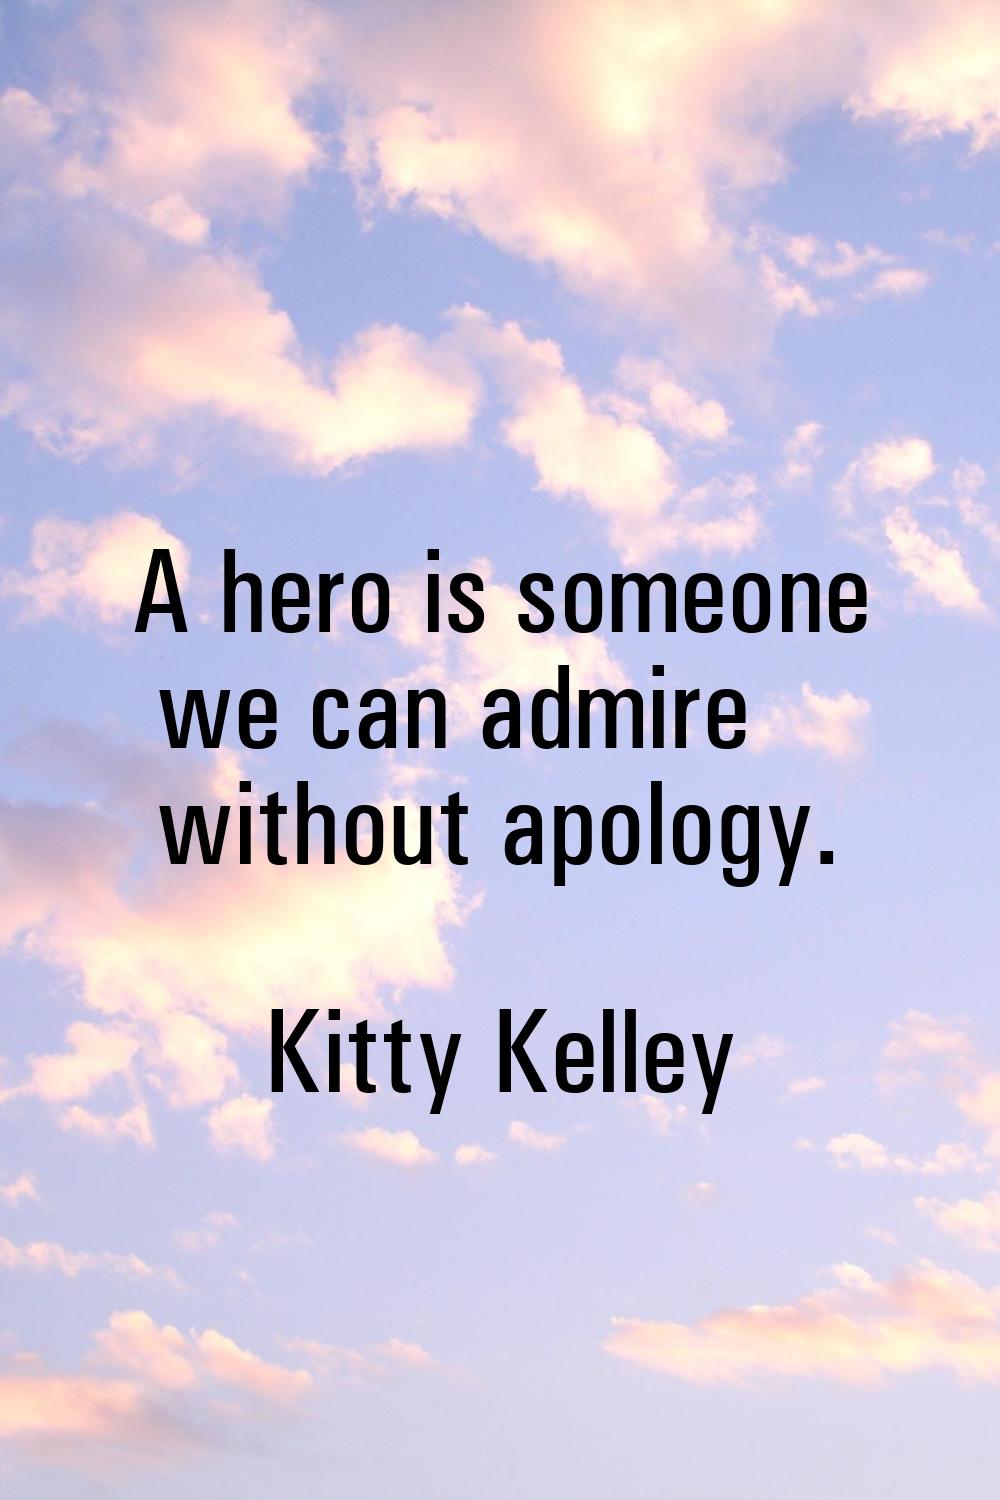 A hero is someone we can admire without apology.